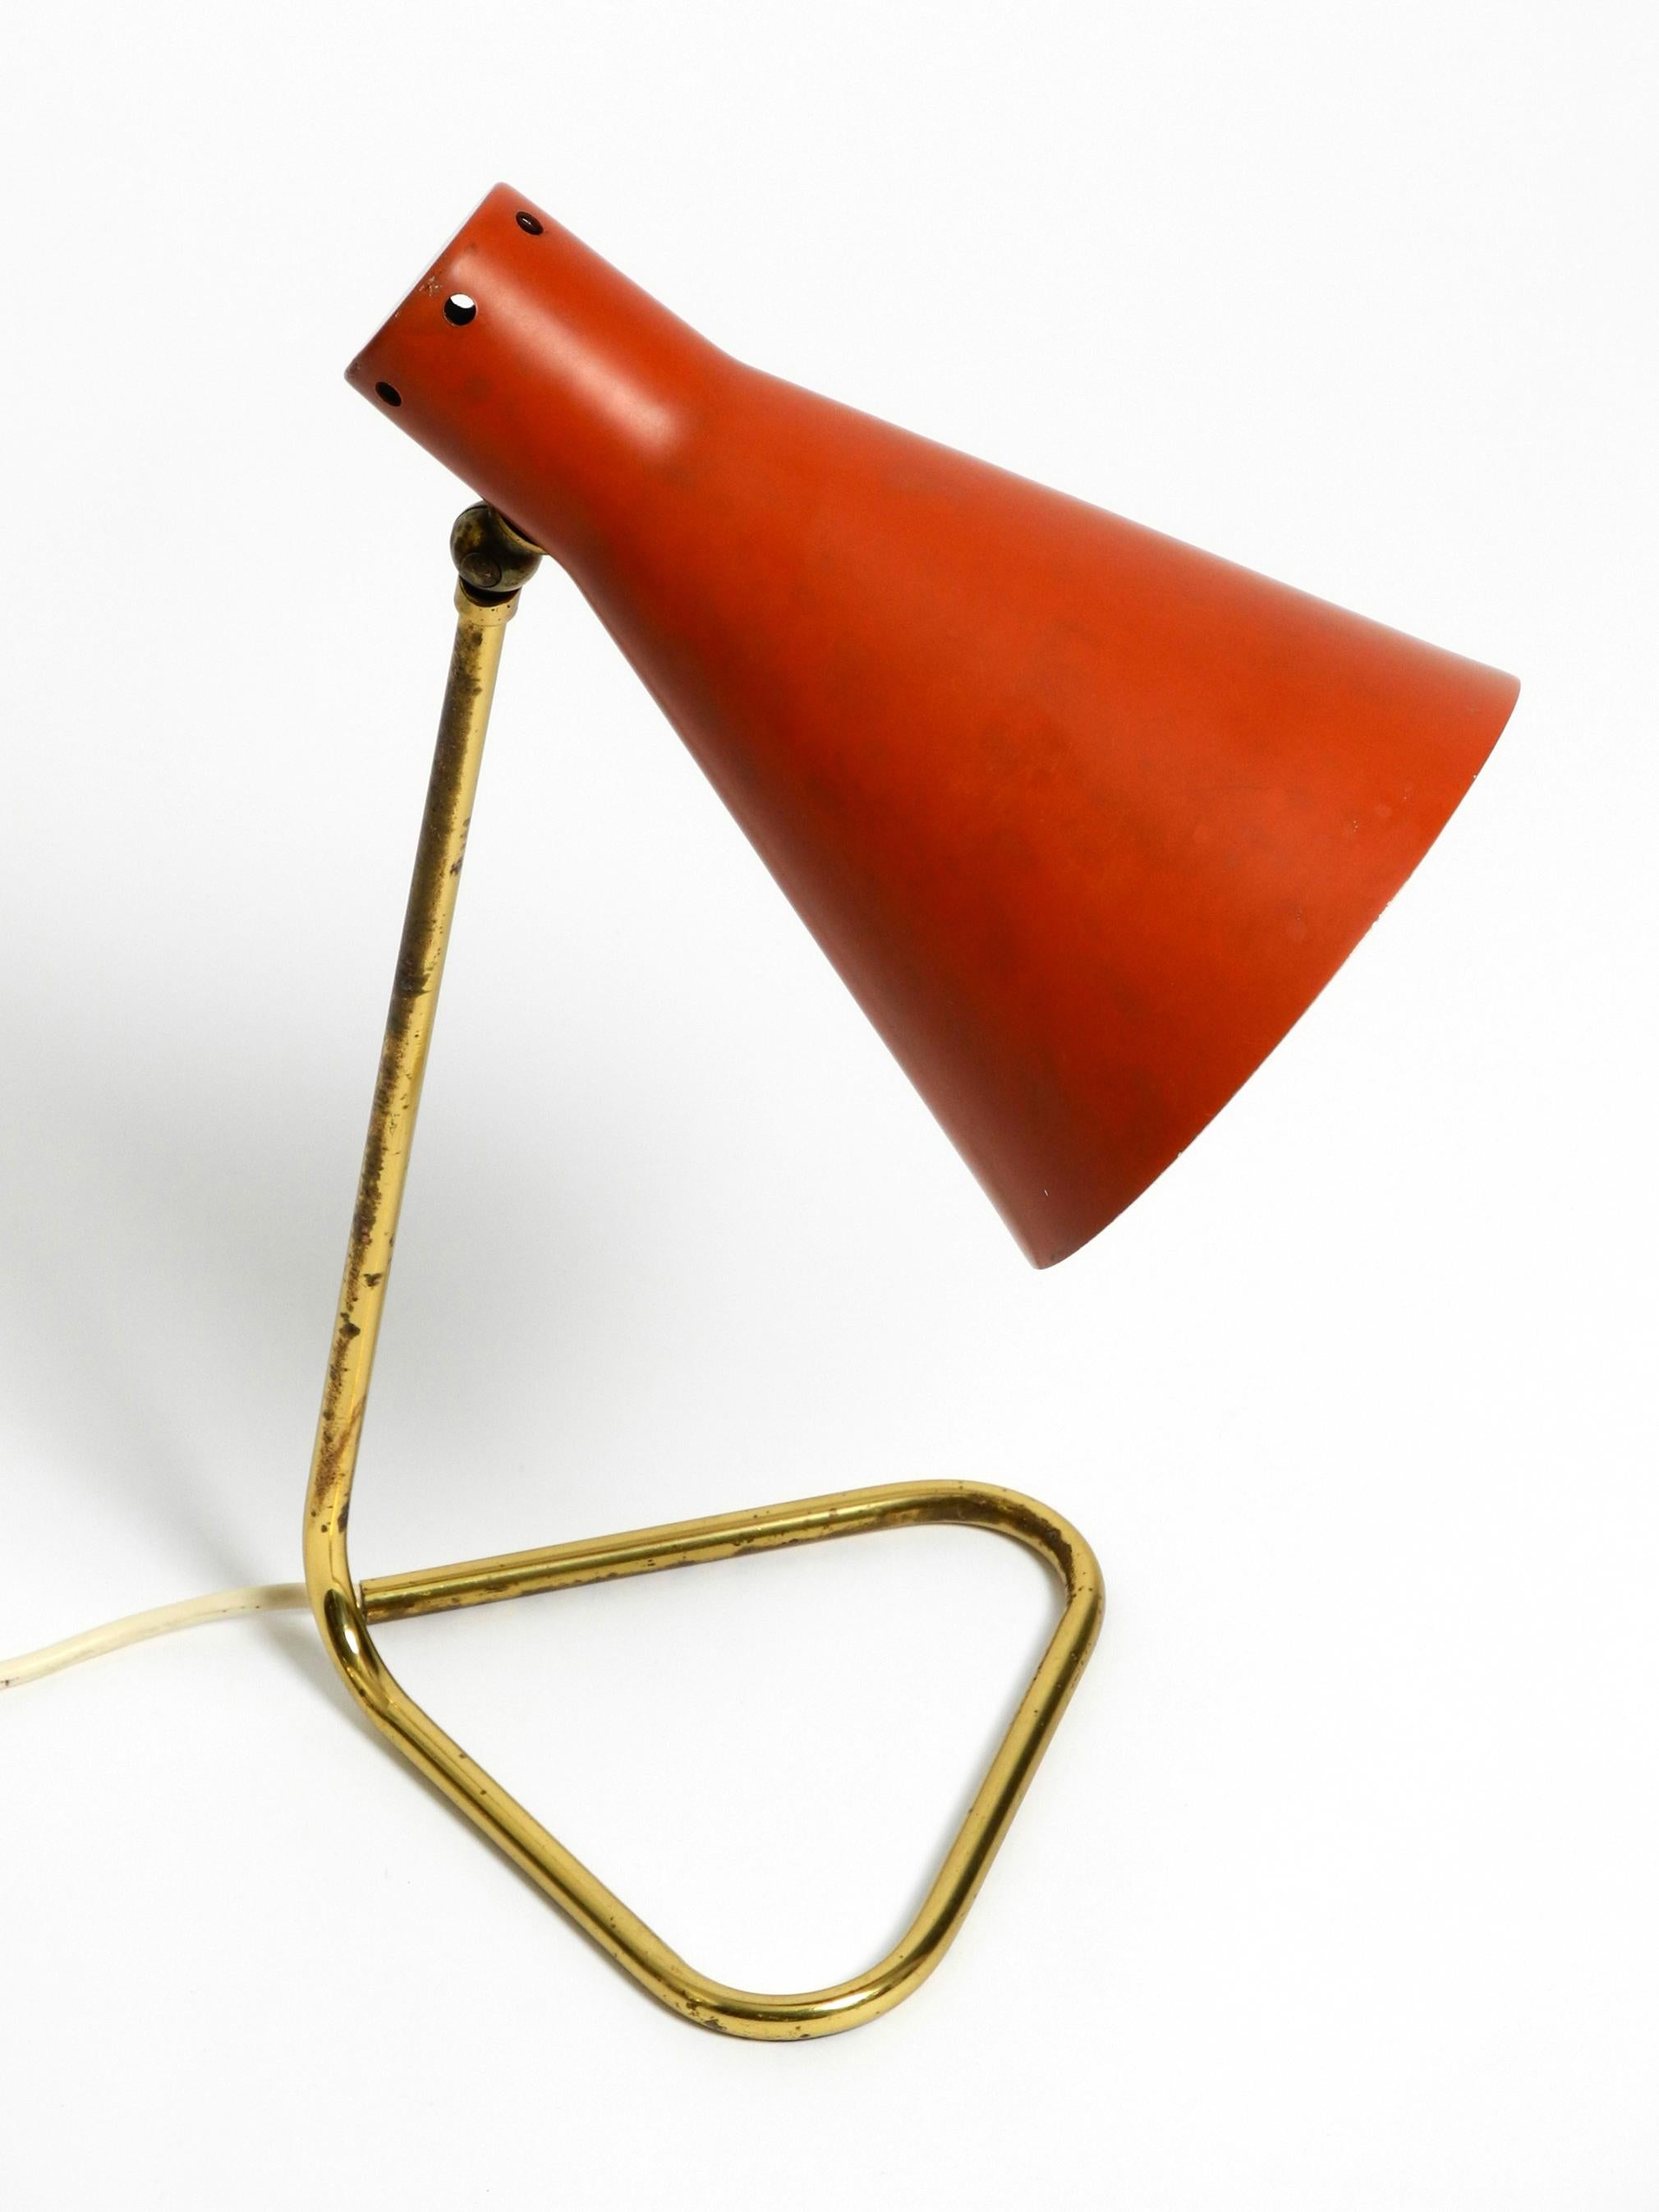 Rare Large Mid-Century Modern Brass Table Lamp with Brick Red Shade For Sale 14